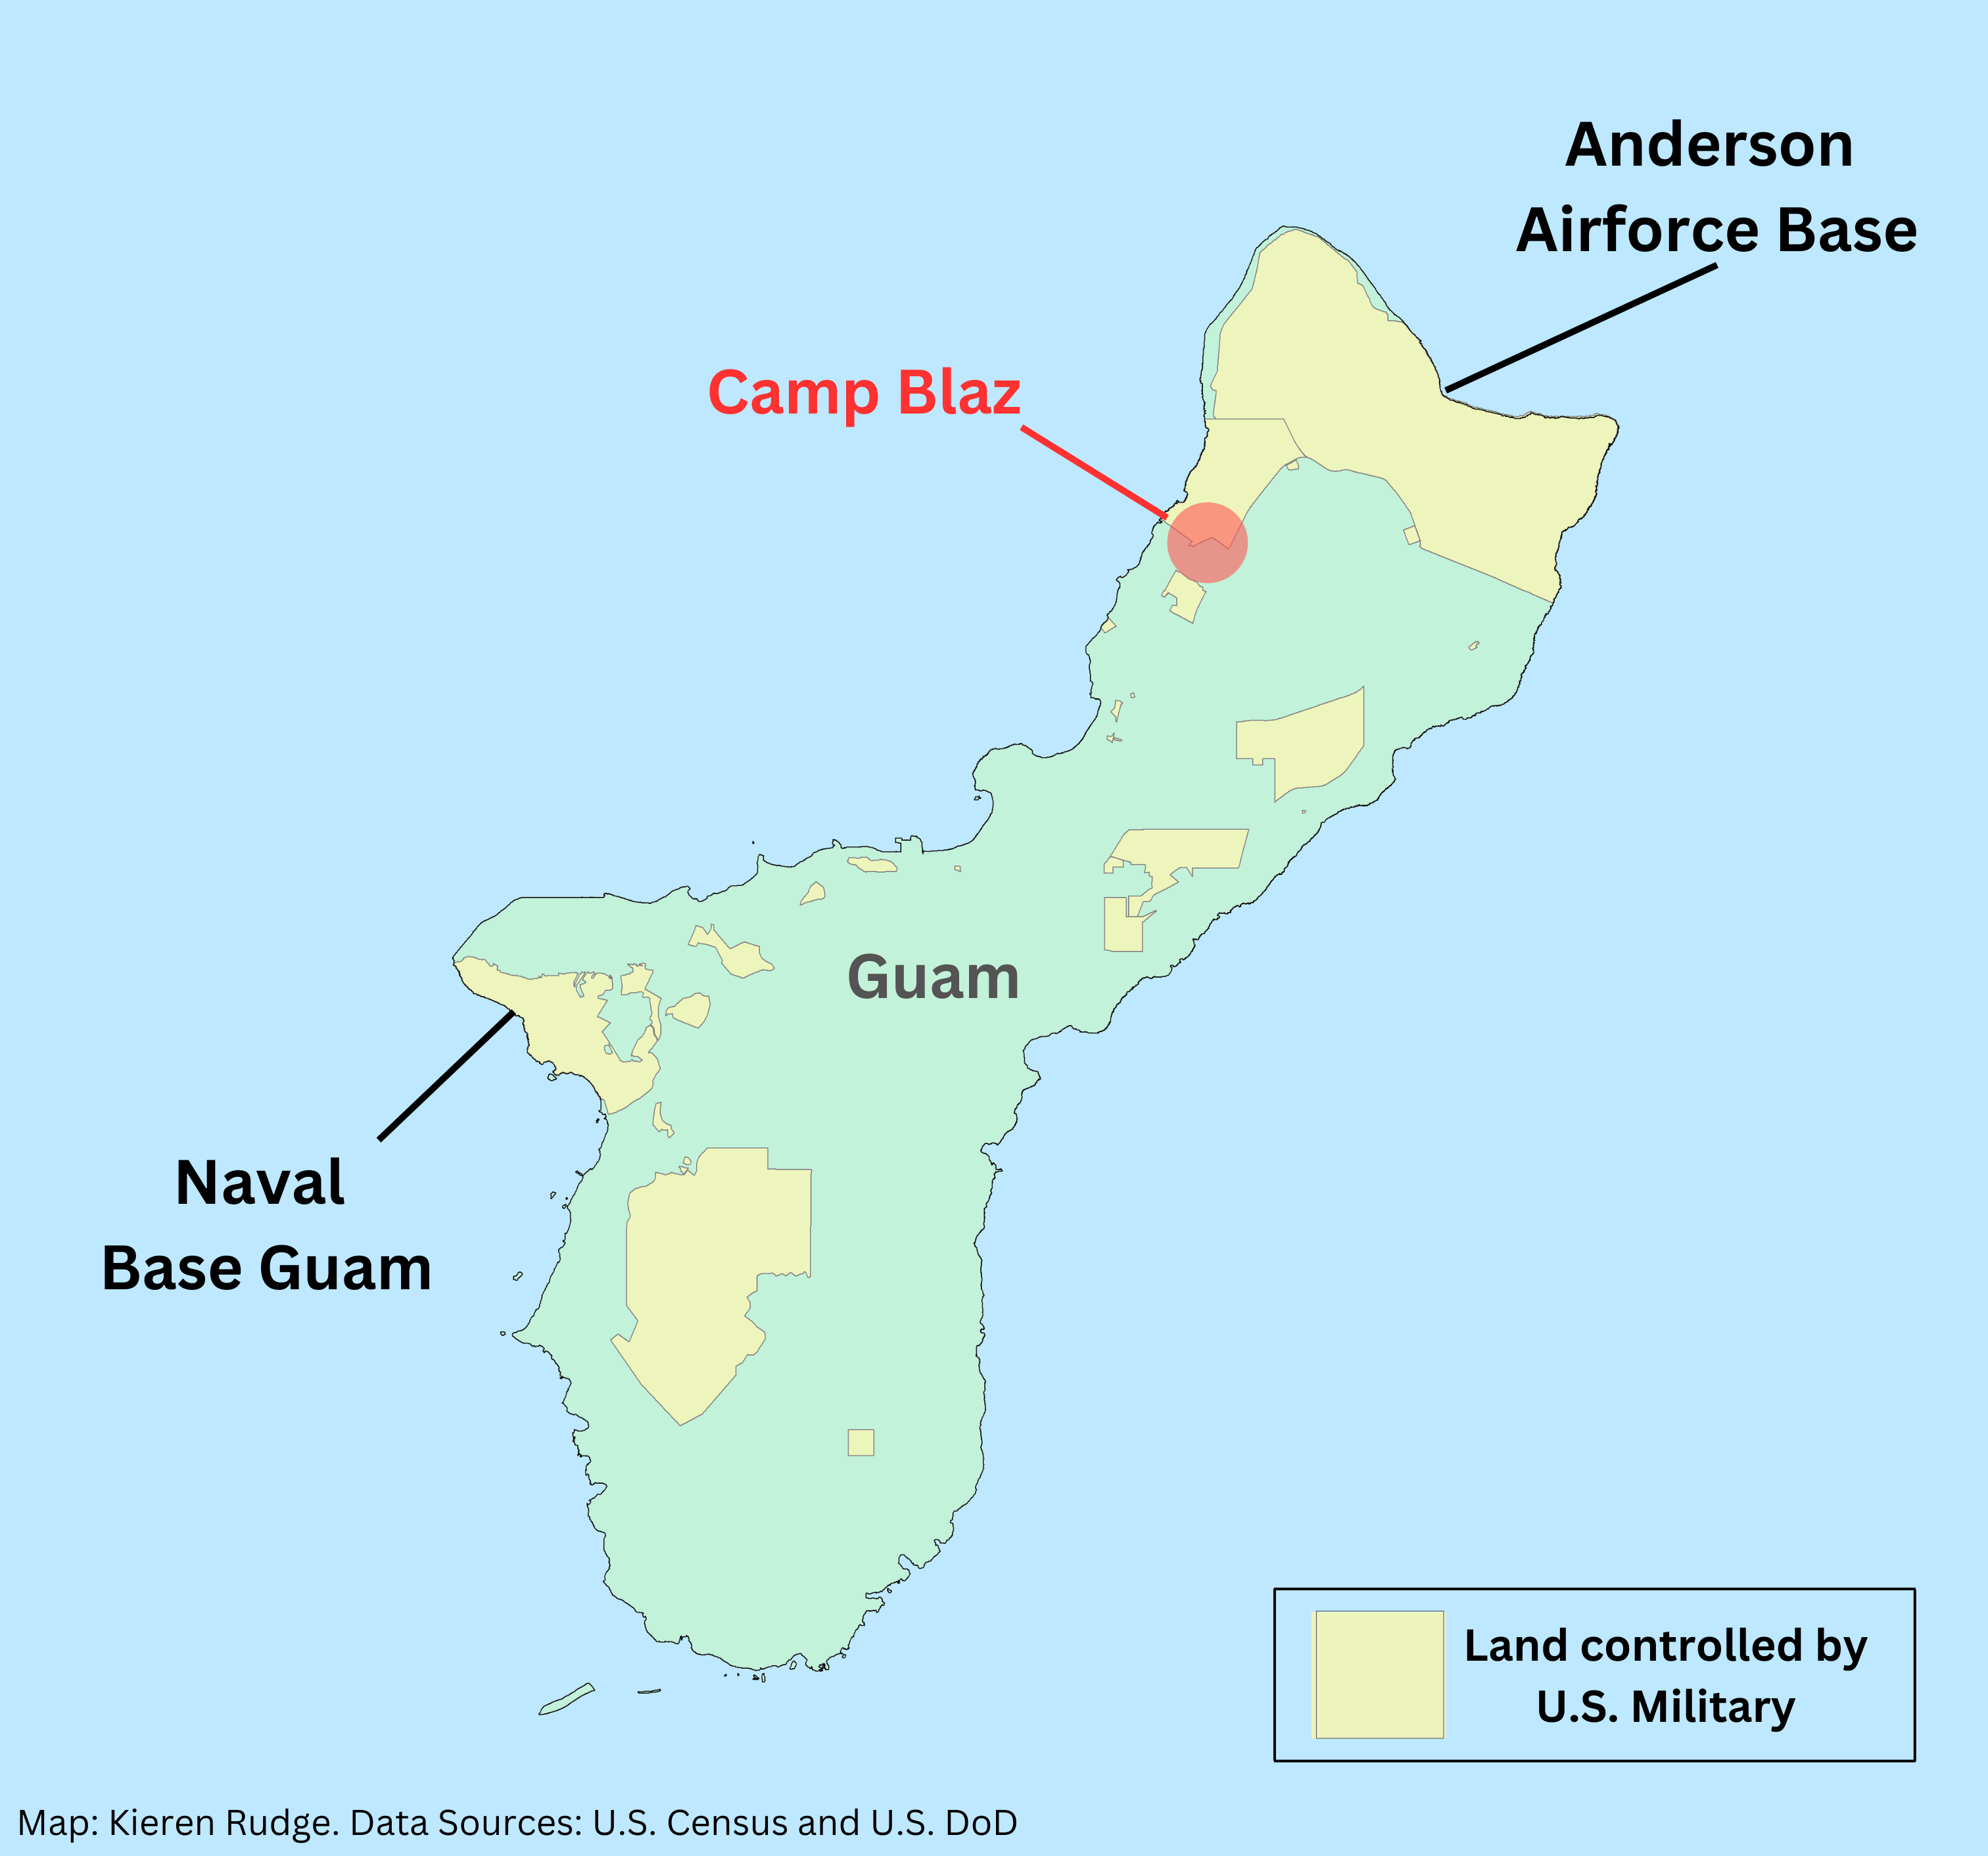 Map of land controlled by the US military in Guam.